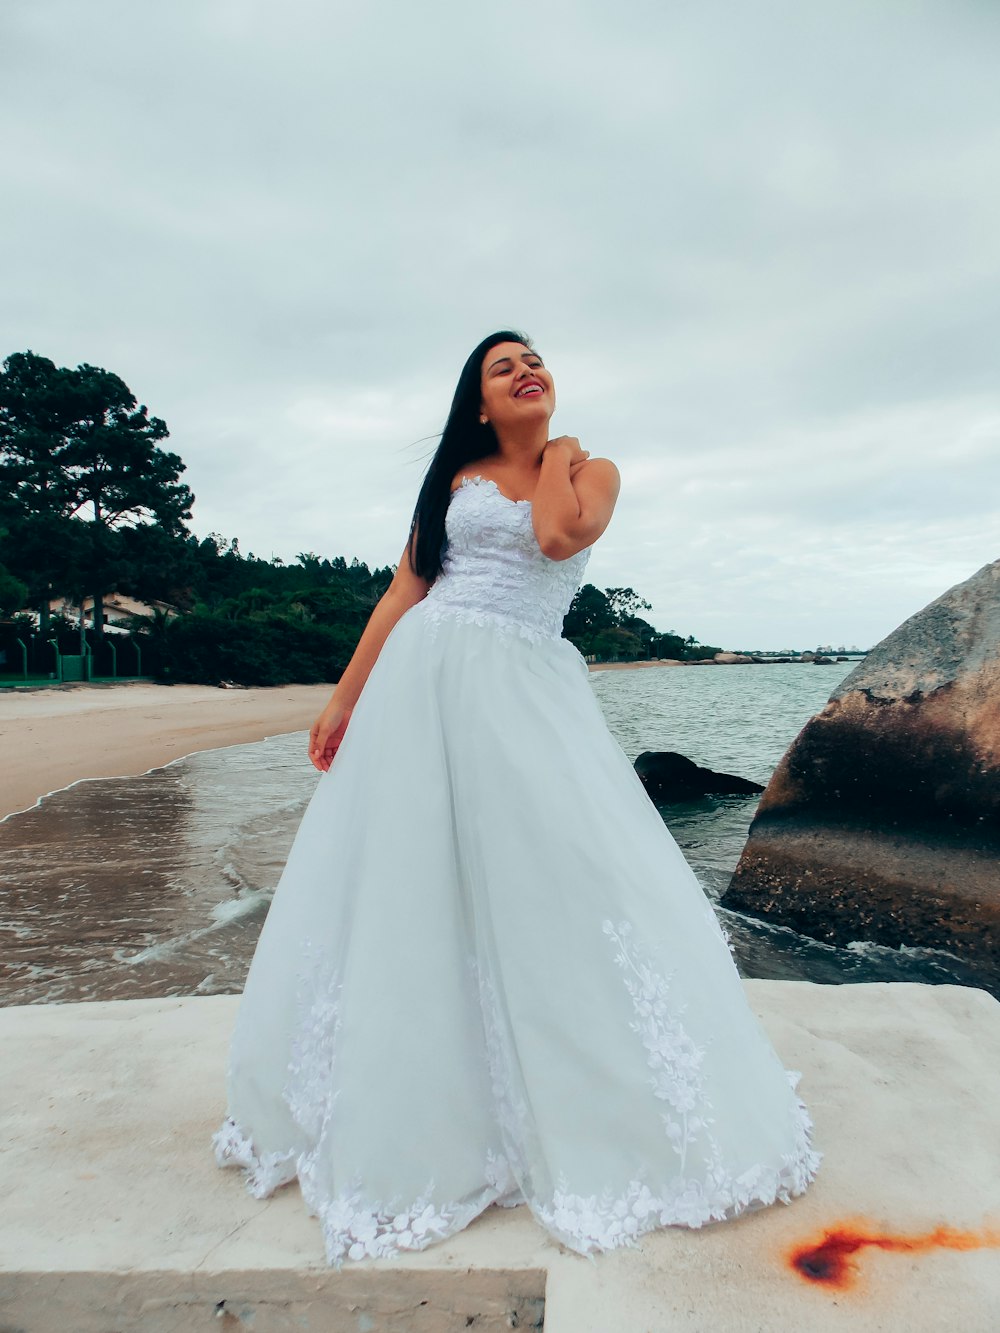 woman in white wedding dress standing on brown sand near body of water during daytime